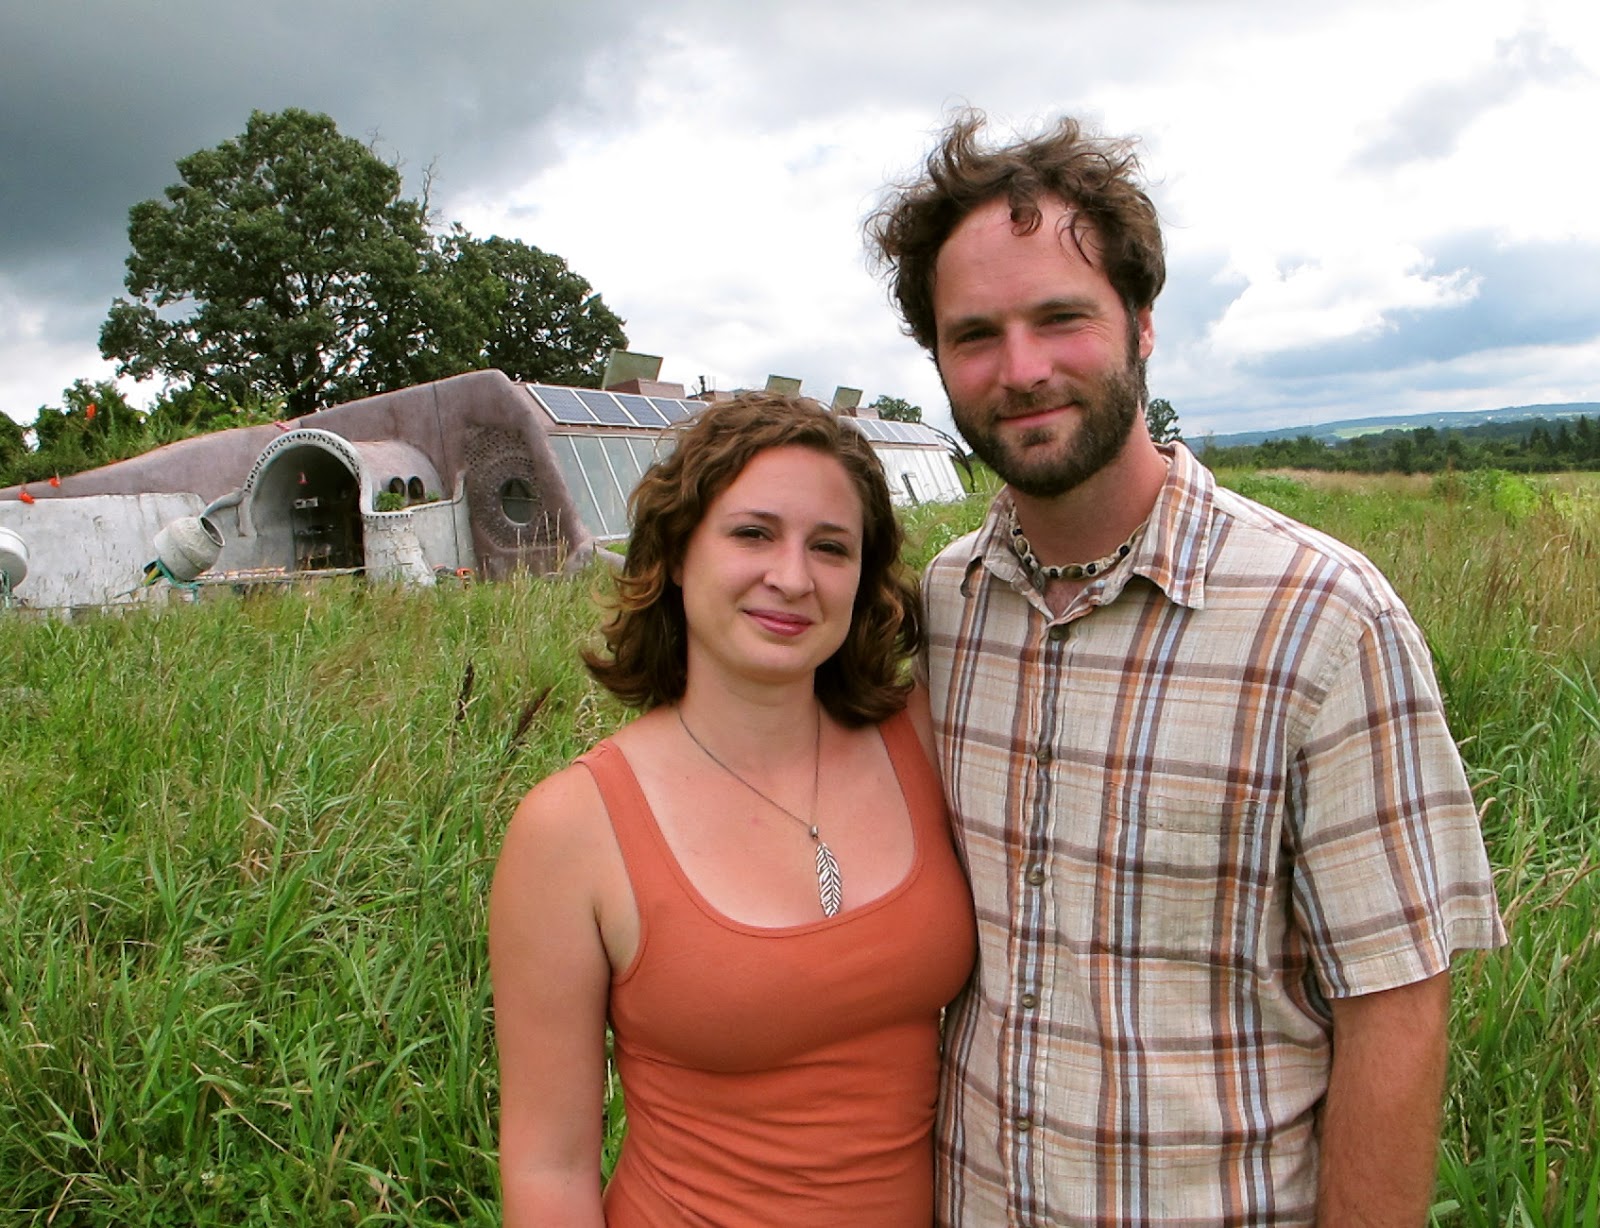 Tour of Freeville Earthship Offered